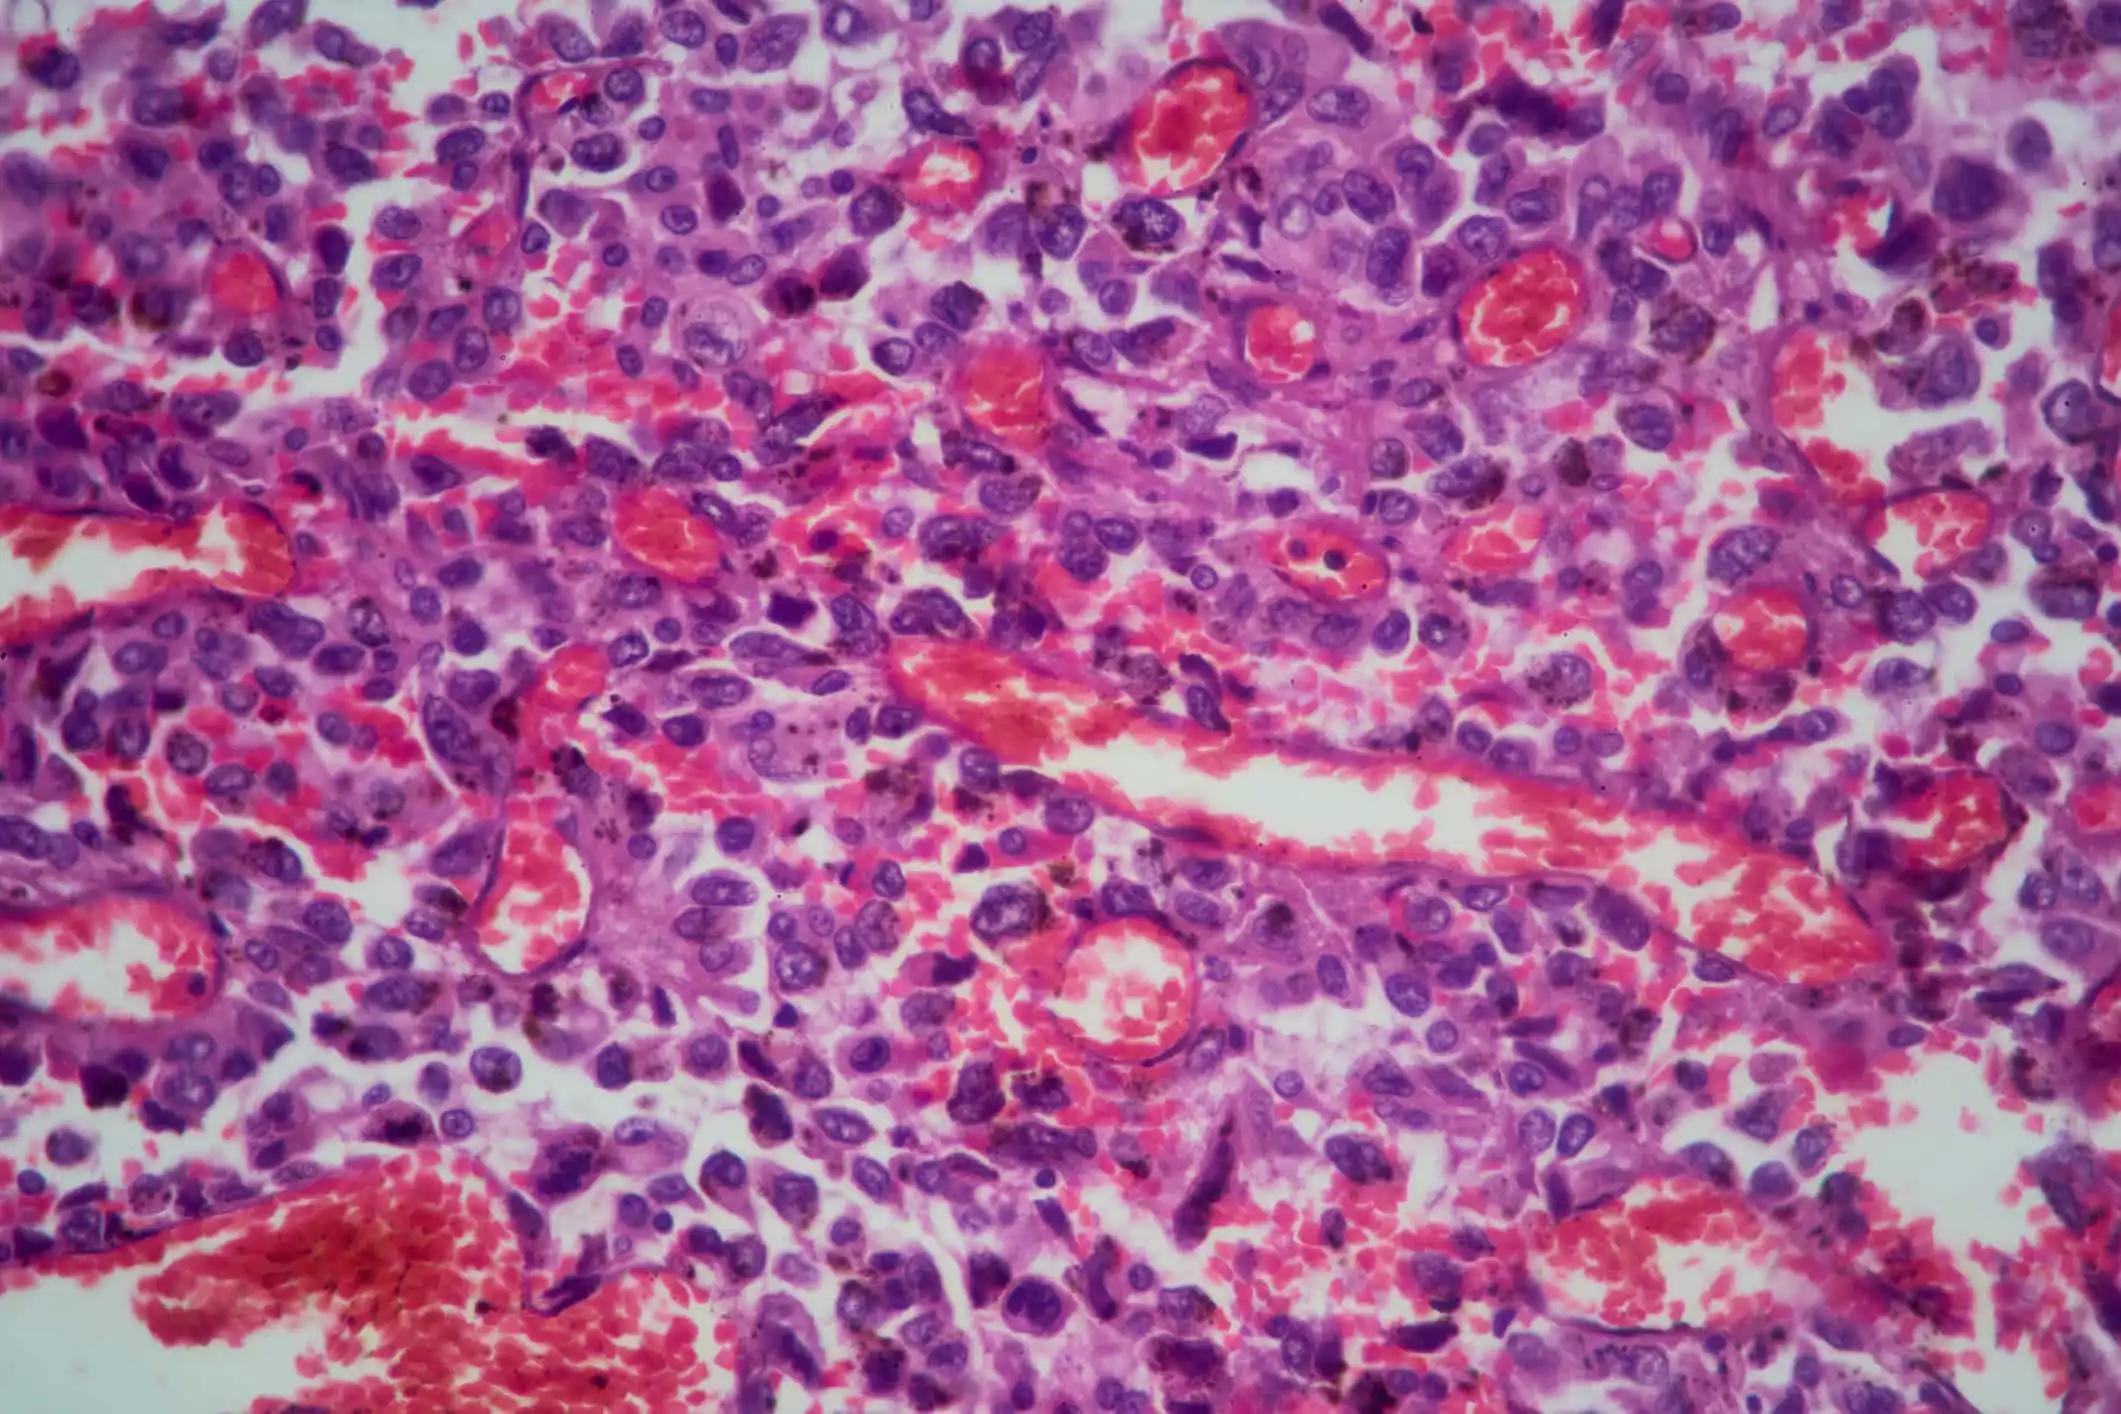 Lung tissue adenocarcinoma with HE stain as seen under a microscope